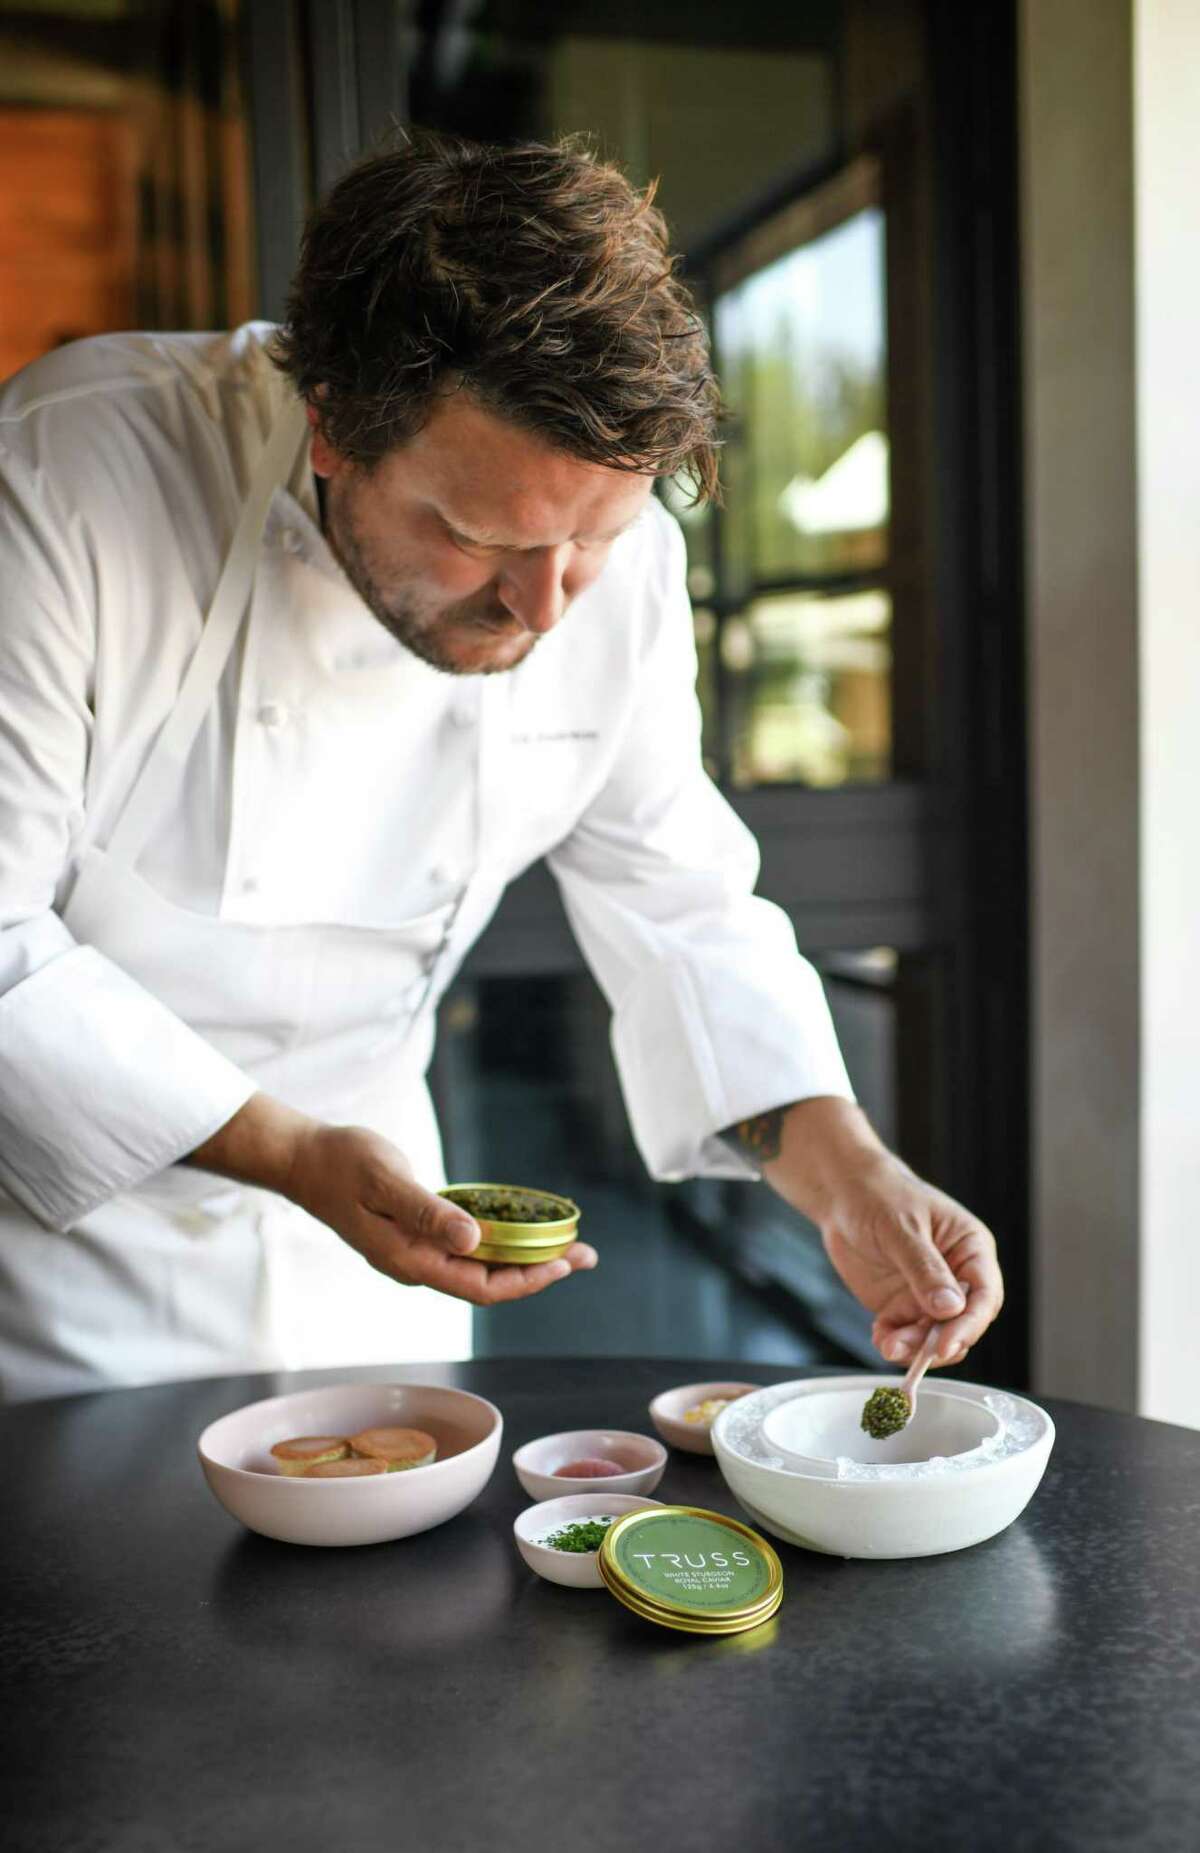 Executive chef Erik Anderson came to Truss Restaurant & Bar from two-Michelin-starred Coi.